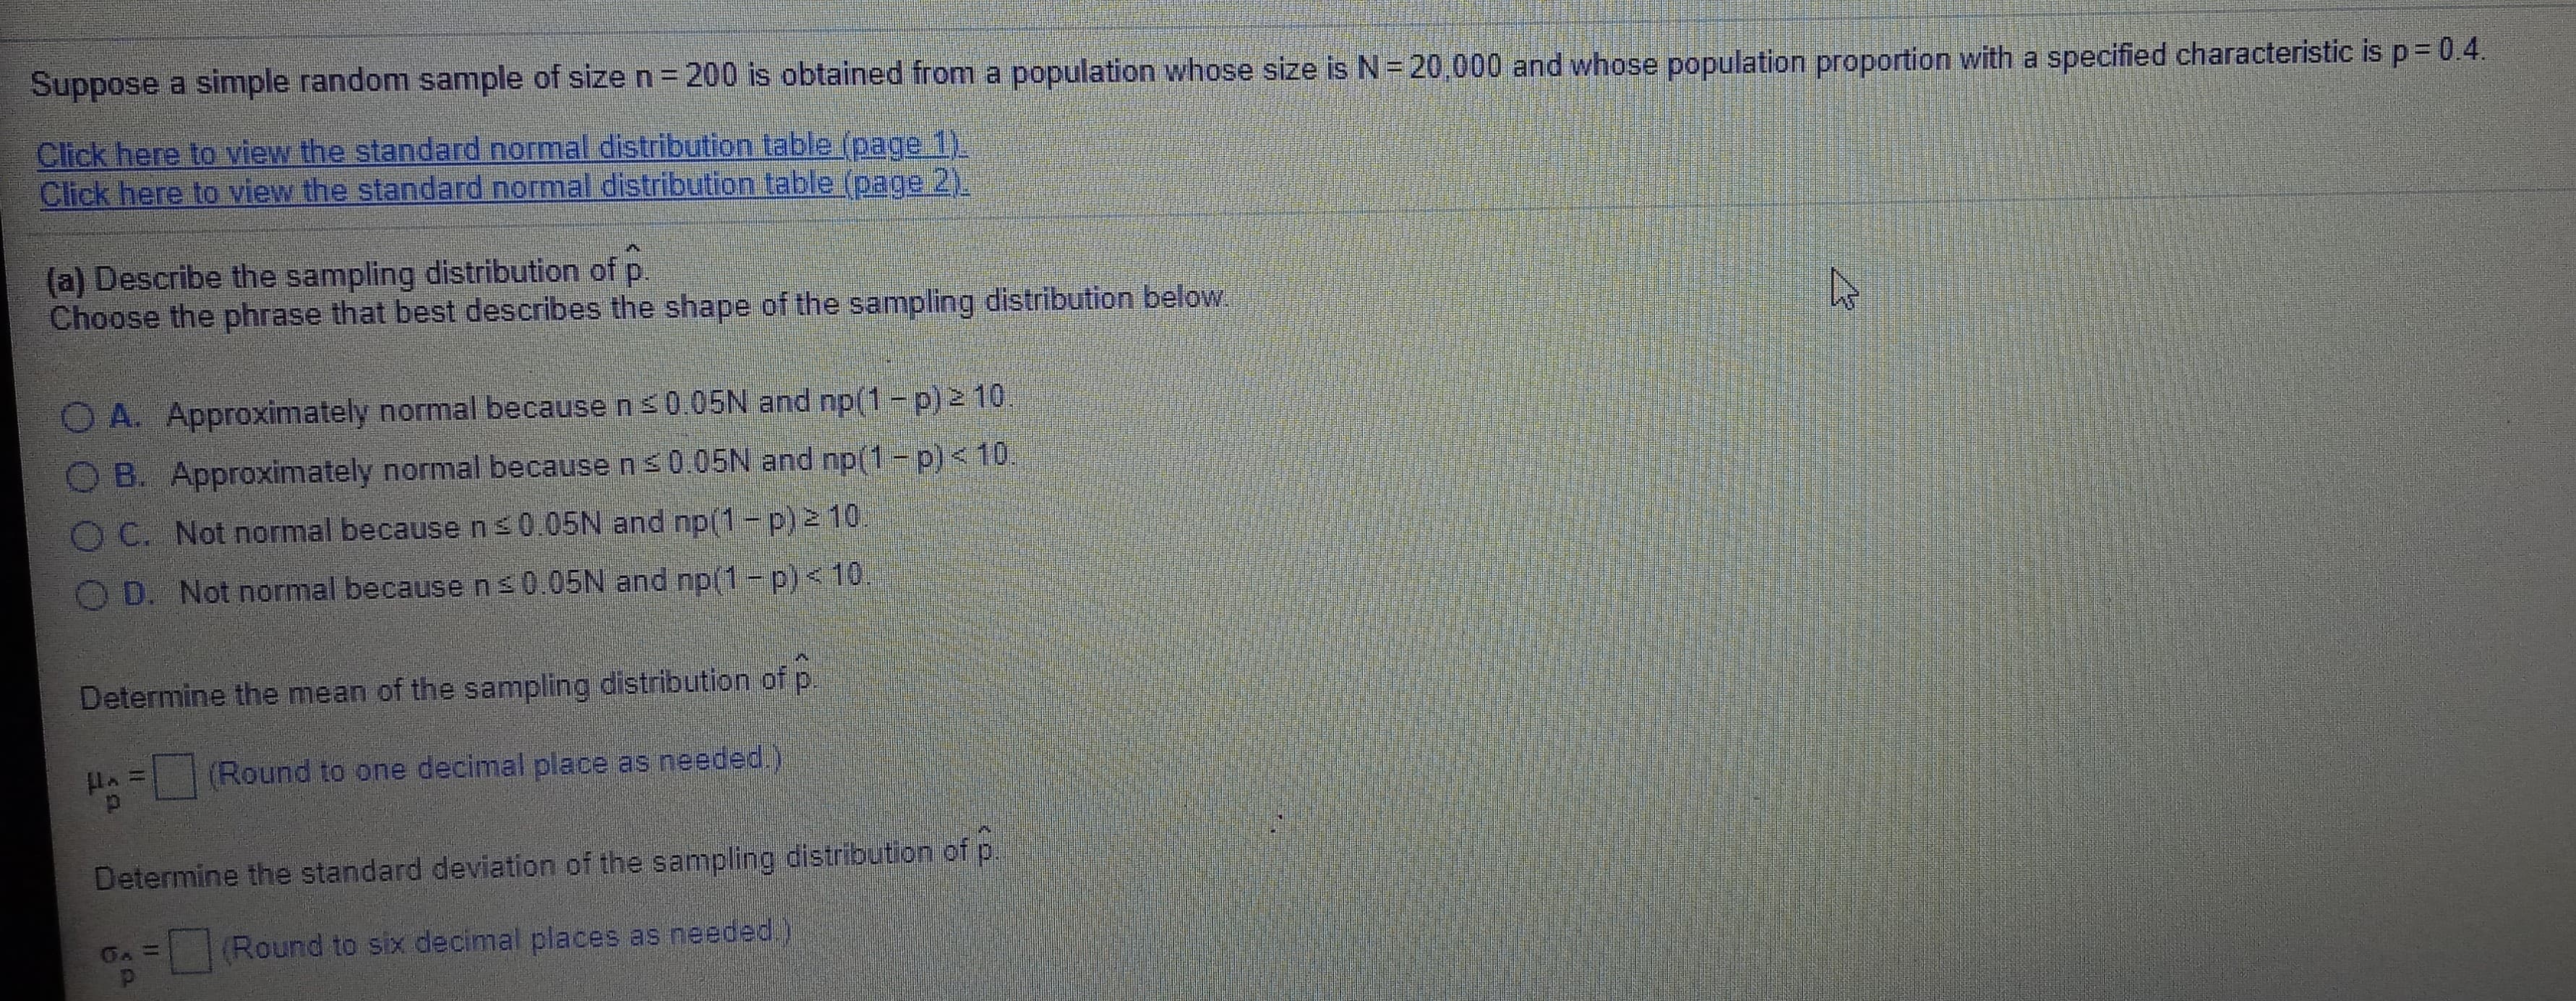 Suppose a simple random sample of size n=200 is obtained from a population whose size is N = 20,000 and whose population proportion with a specified characteristic is p= 0.4.
tho ctancard normal distribution table inage 11
